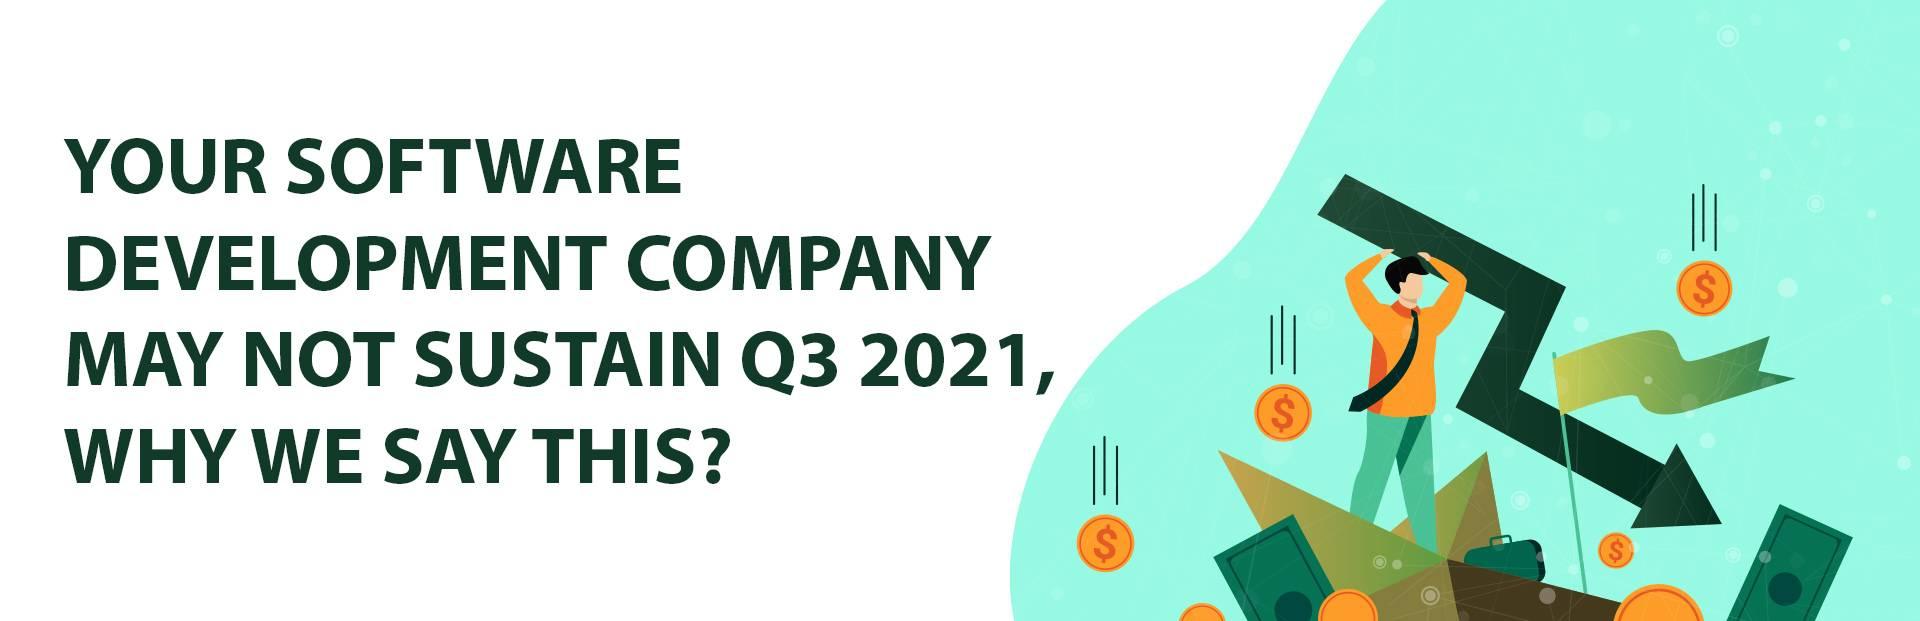 Your software development company may not sustain Q3 2021, why we say this?